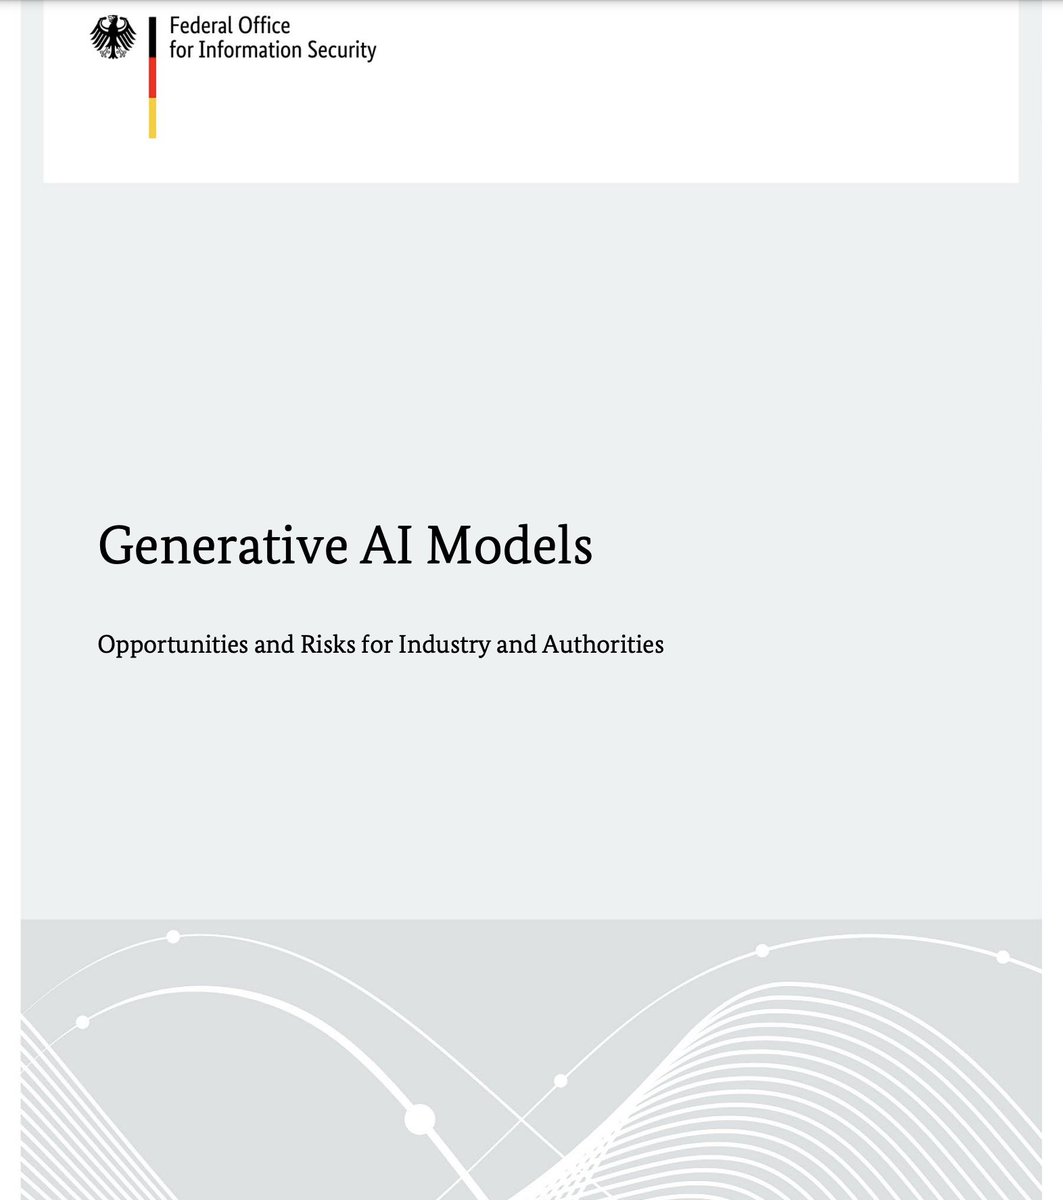 🚨 AI Policy Alert: The German Federal Office for Information Security publishes the report 'Generative AI Models - Opportunities and Risks for Industry and Authorities.' Quotes & comments: 'LLMs are trained based on huge text corpora. The origin of these texts and their quality…